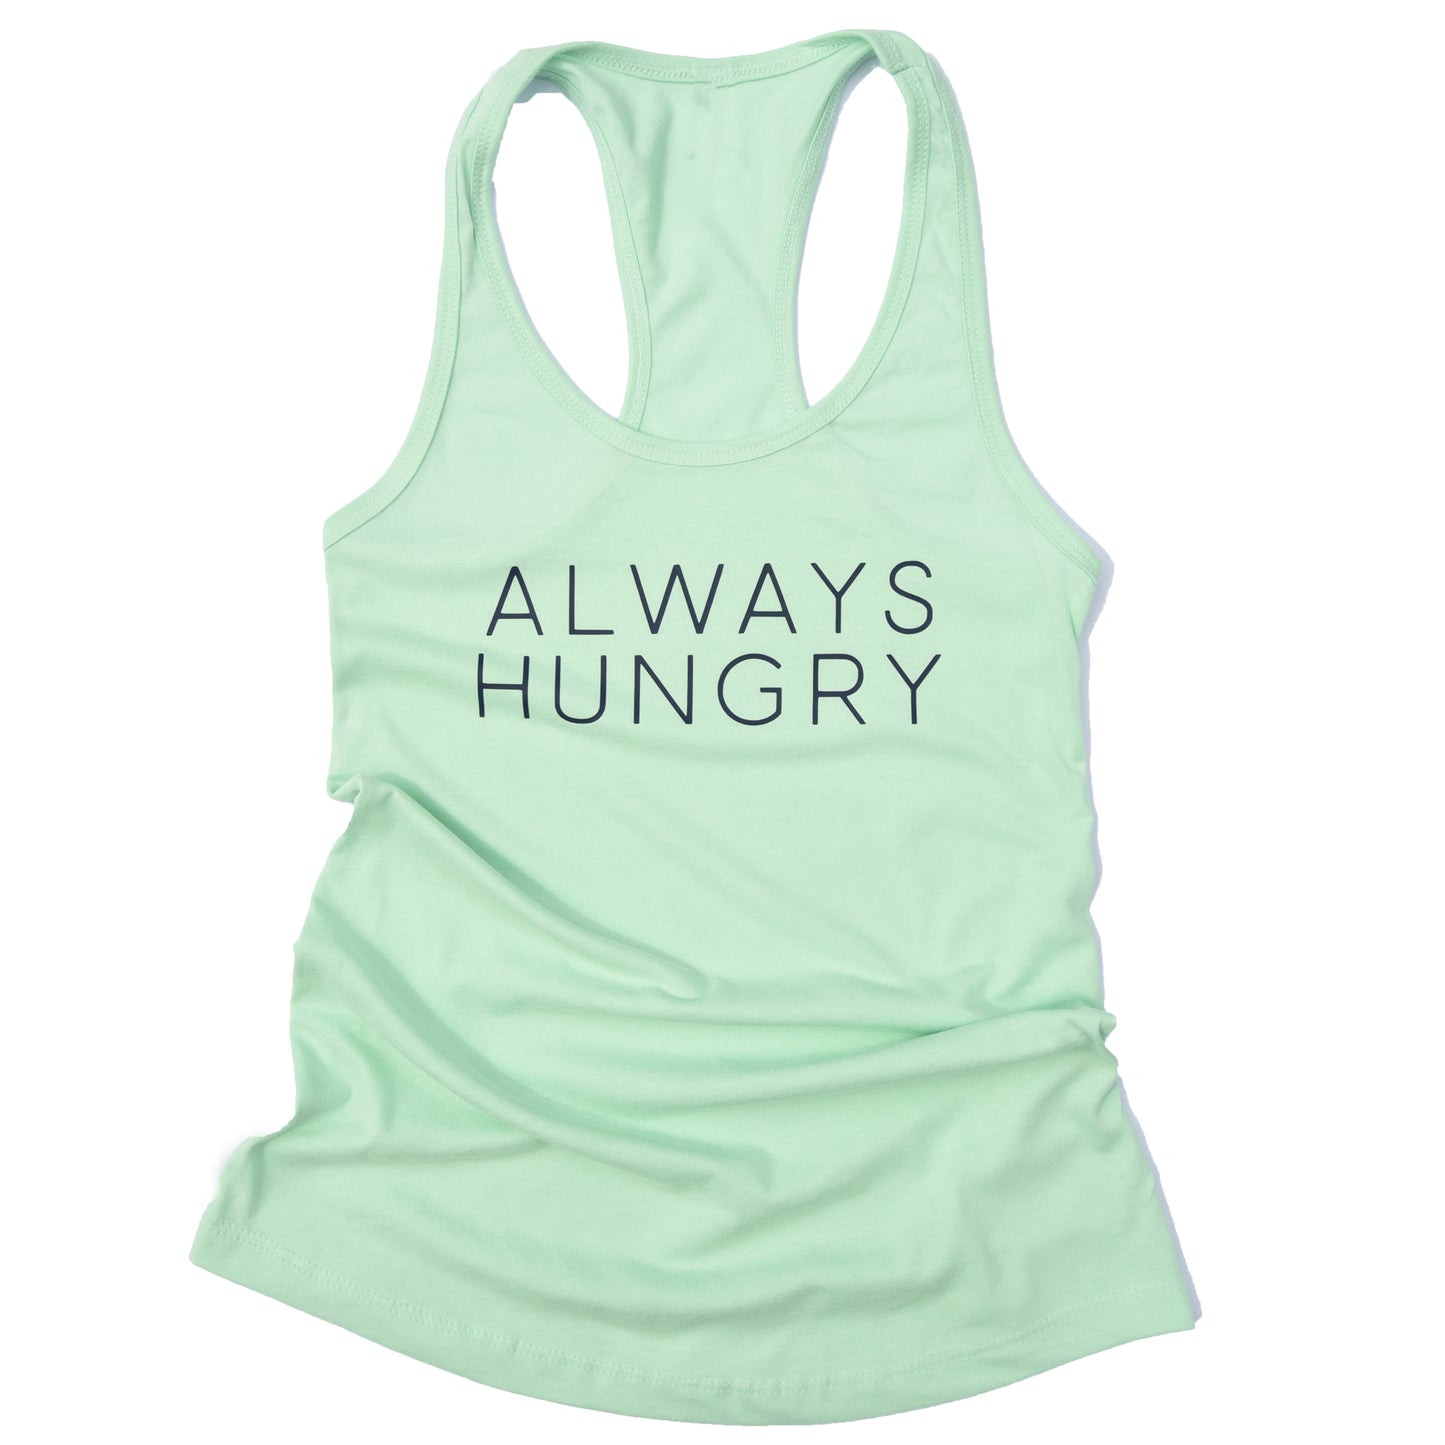 Classic Tank - Always Hungry - Mint